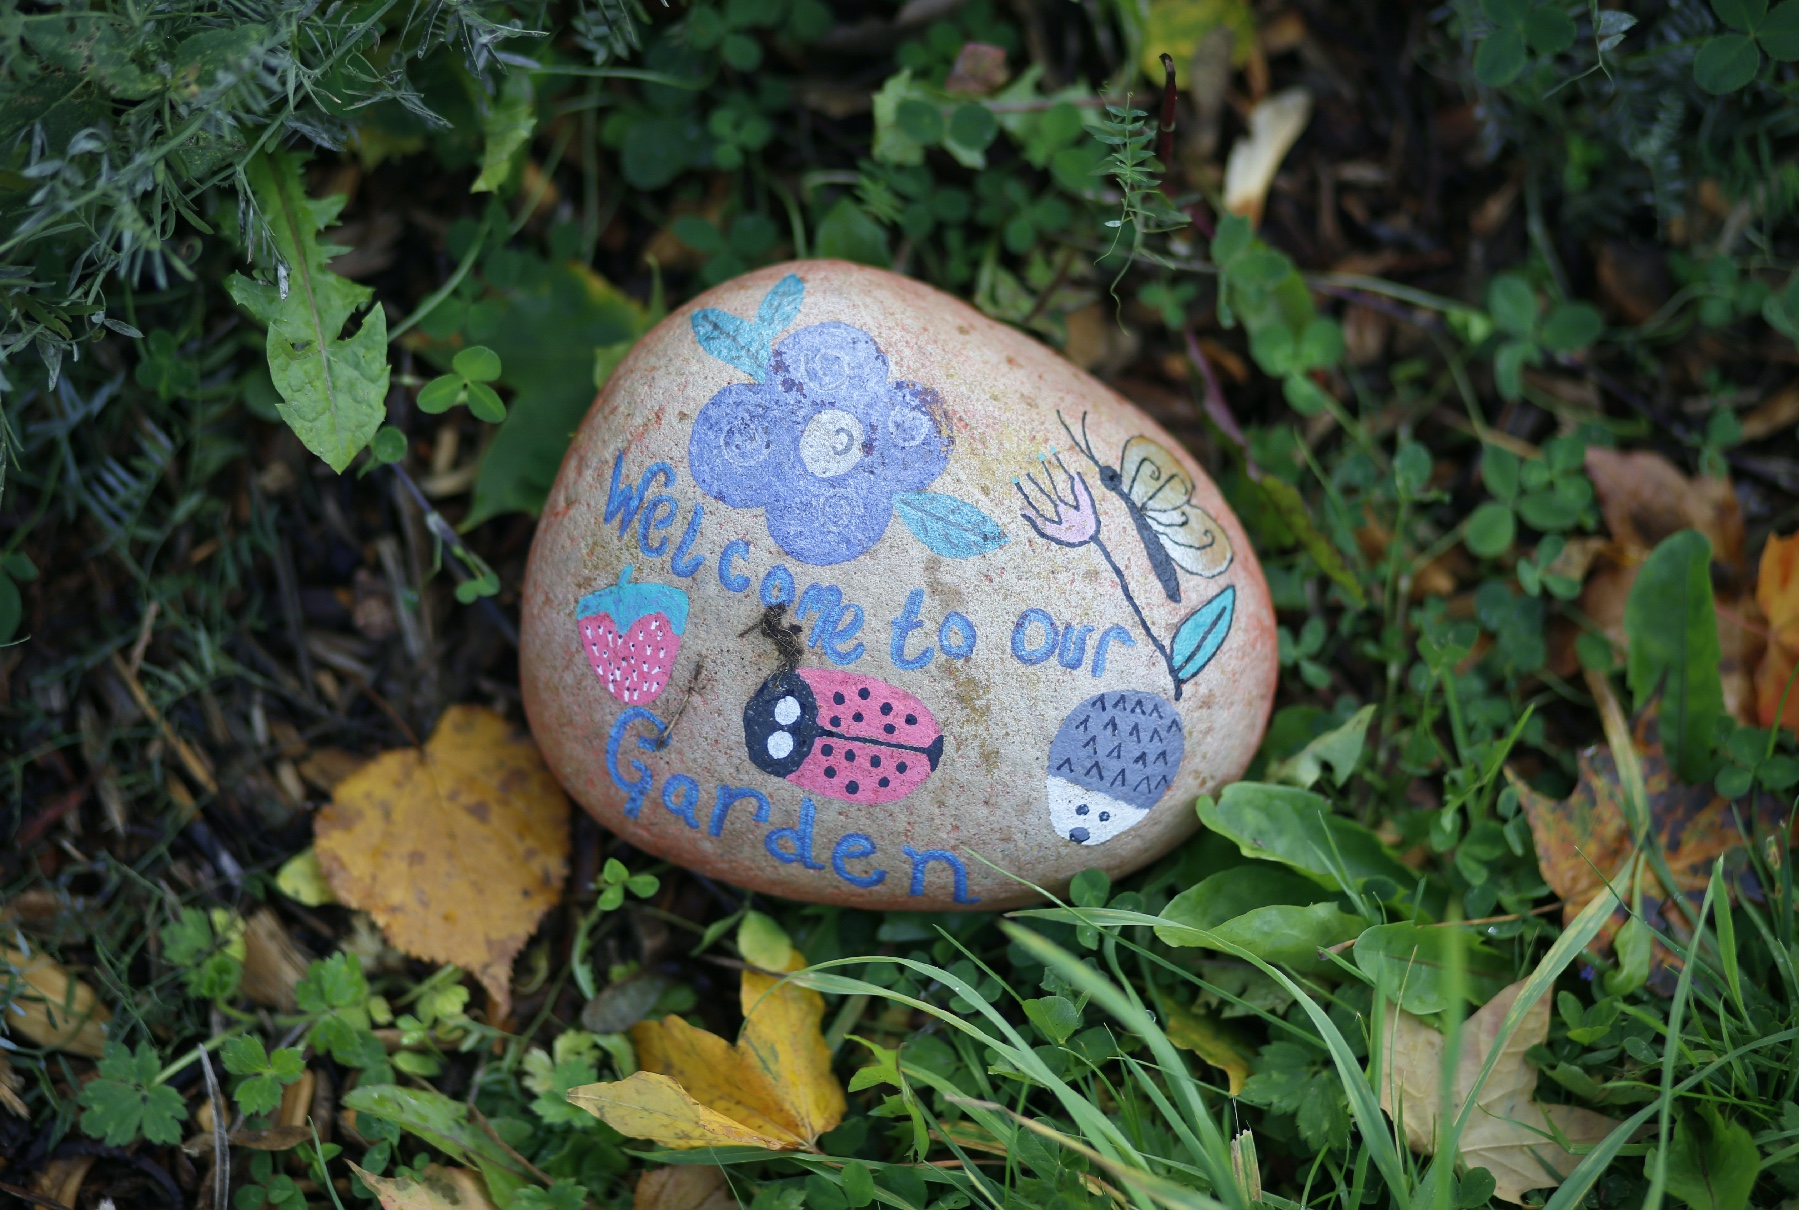 A photo of a small rock that has been painted with flowers and text that says 'Welcome to our garden'.